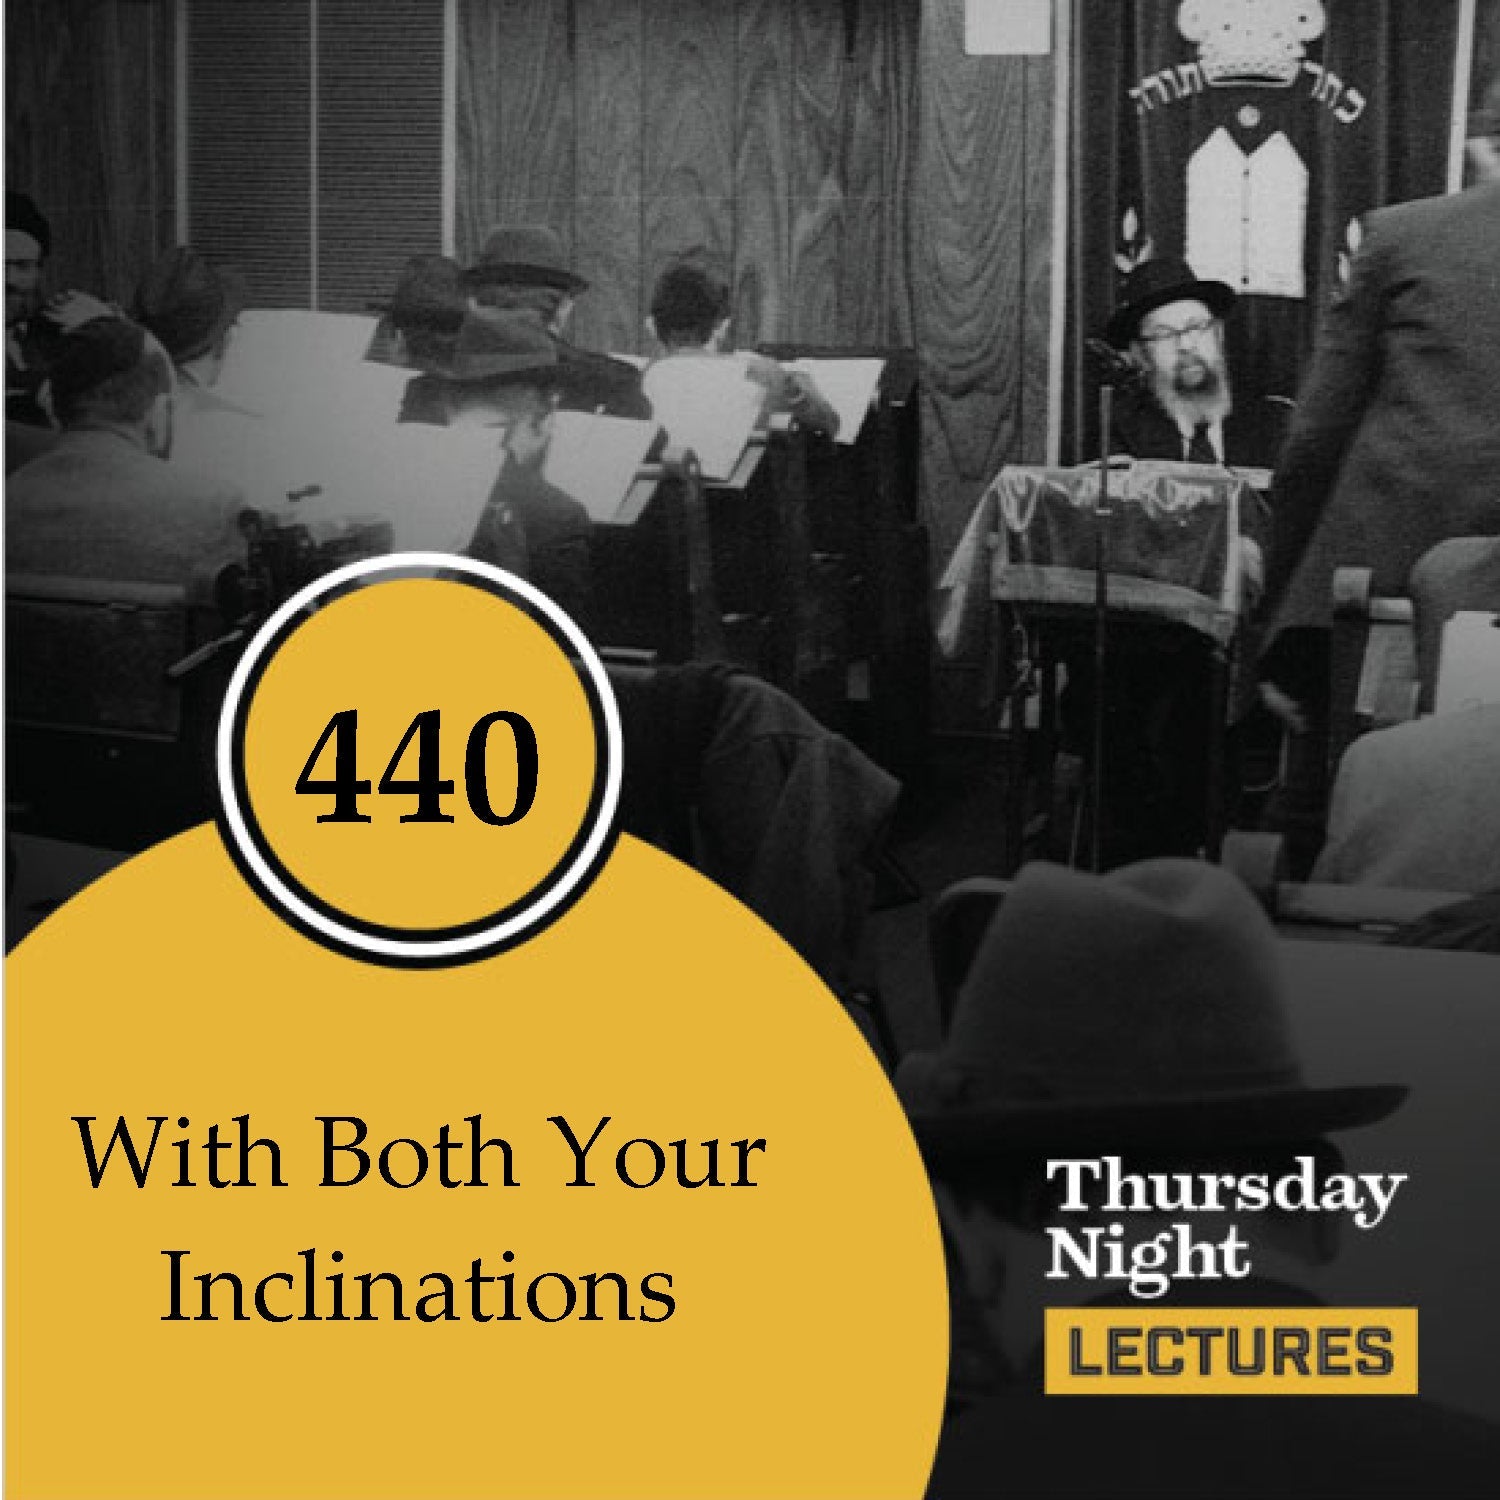 440 - With Both Your Inclinations